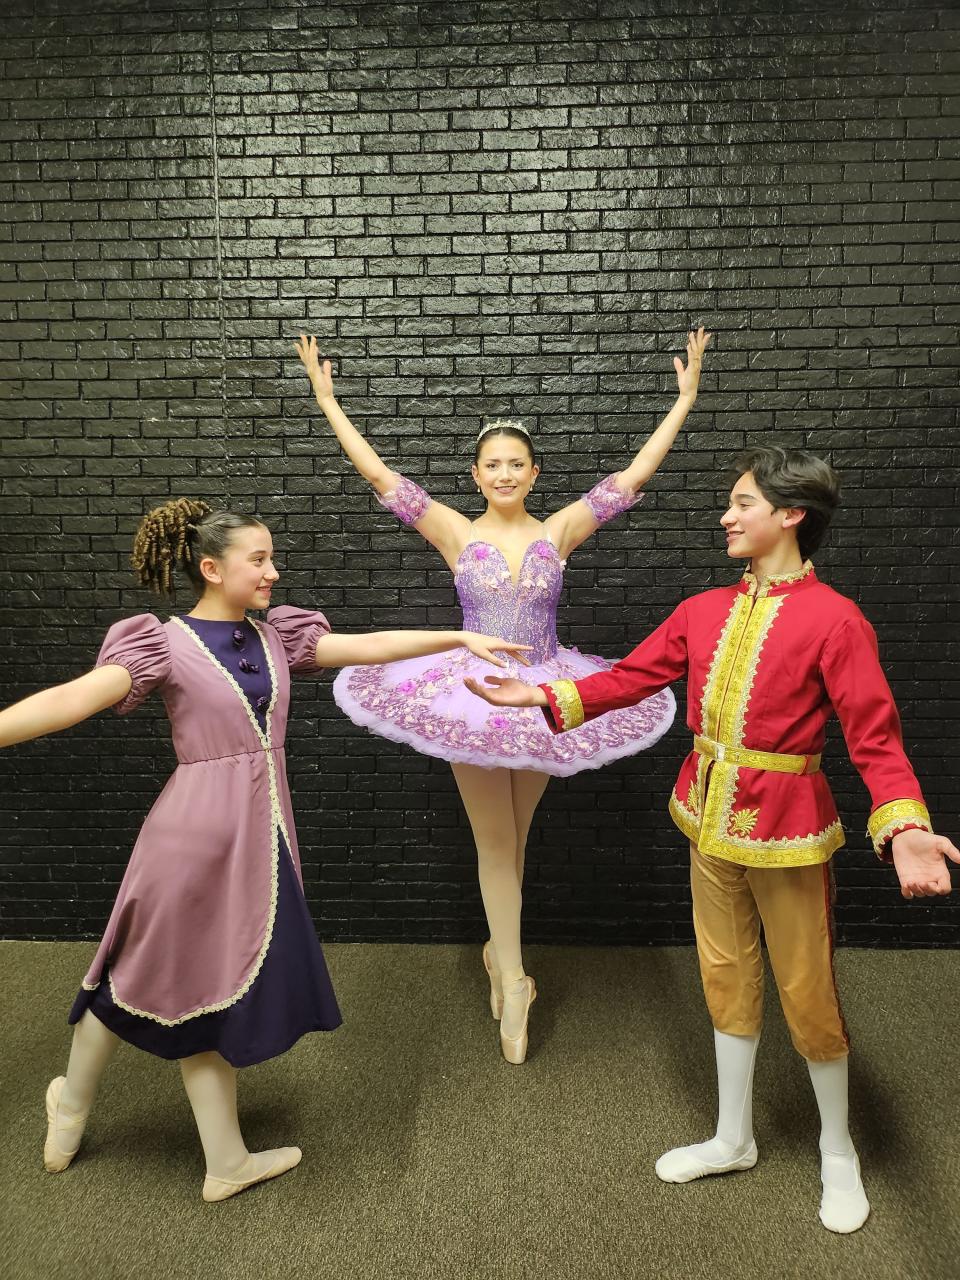 From left, Ariella Telles, portraying Clara; Emily Evans, portraying the Sugar Plum Fairy; and Jaxx Creek, portraying the Prince rehearse for the upcoming production of Lone Star Ballet's "The Nutcracker," to be held Dec. 8-10 at the Amarillo Civic Center Auditorium.